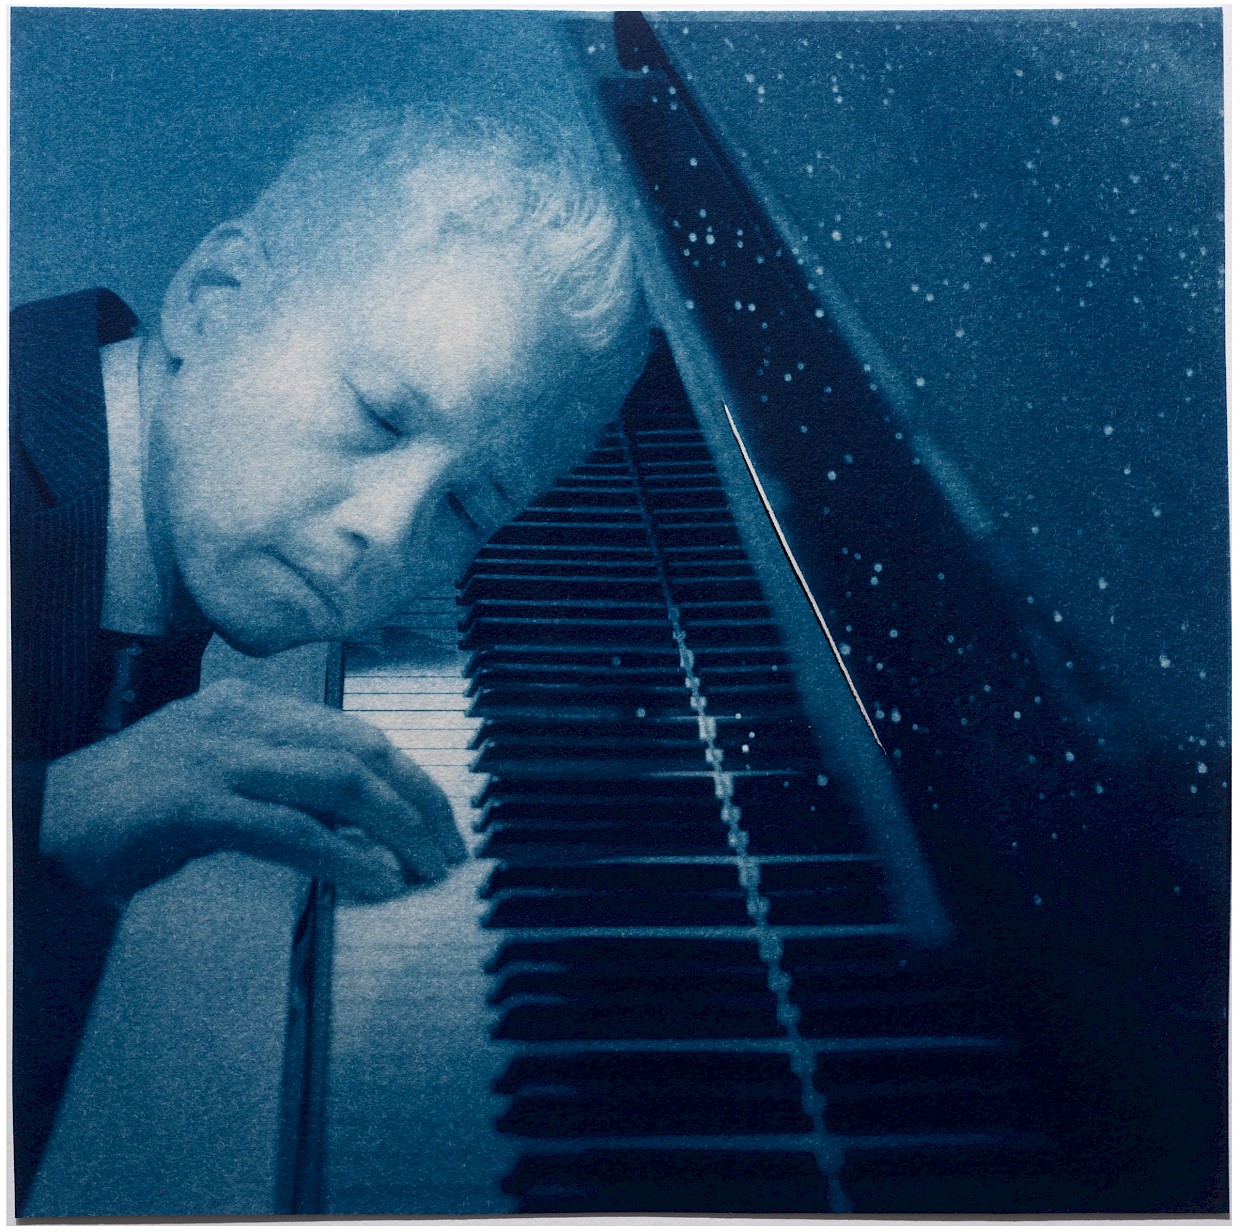 man with head on piano keys listening intently with stars coming from piano